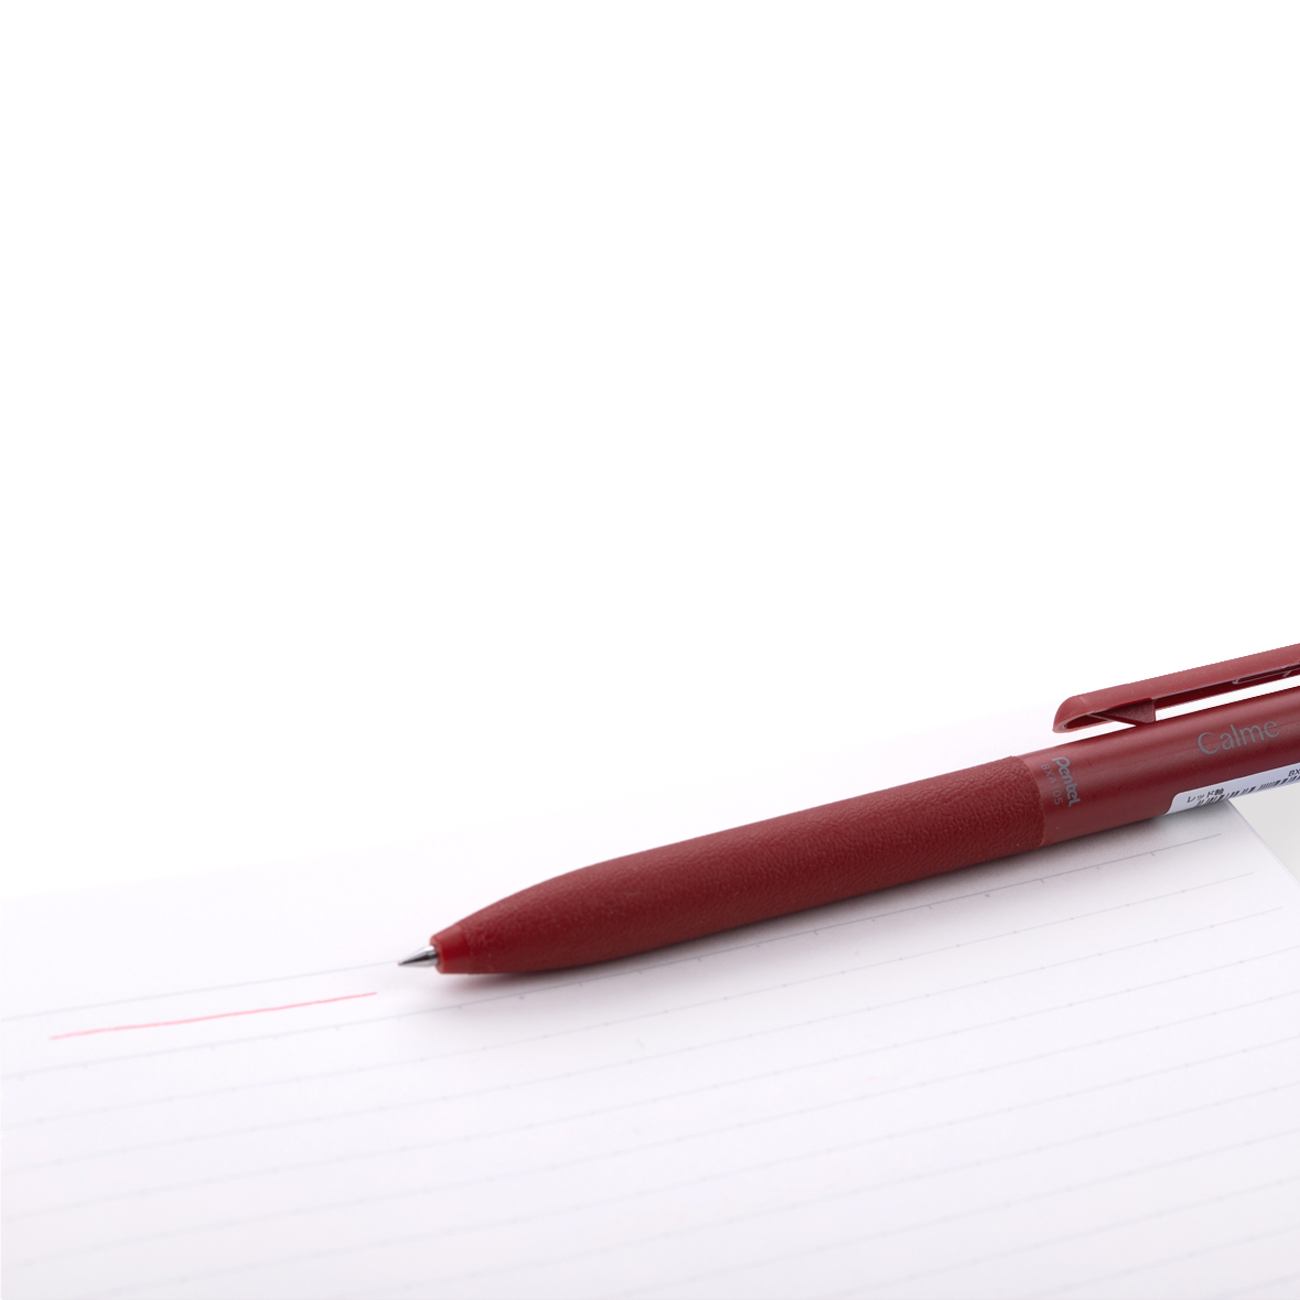 Pentel Calme Ballpoint Pen - 0.5 mm - Red Body - Red Ink - Stationery Pal